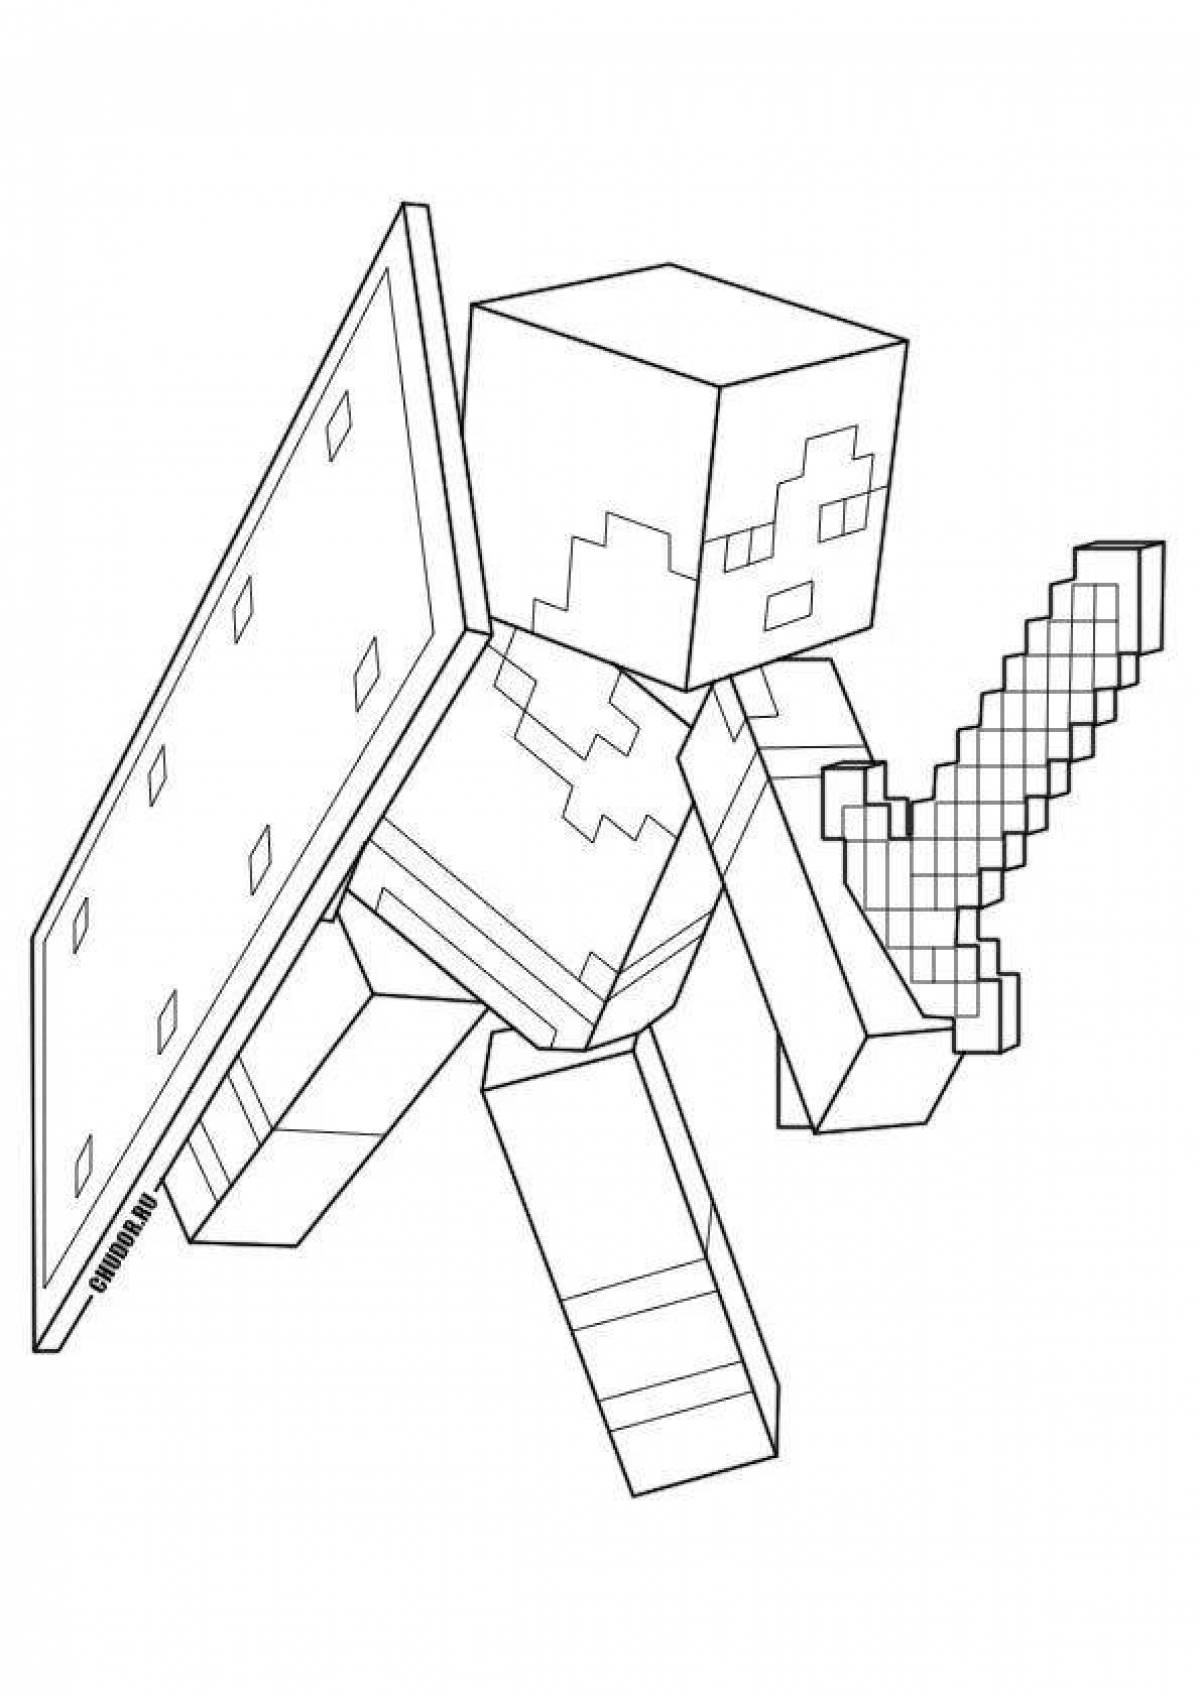 Adorable minecraft cat coloring page